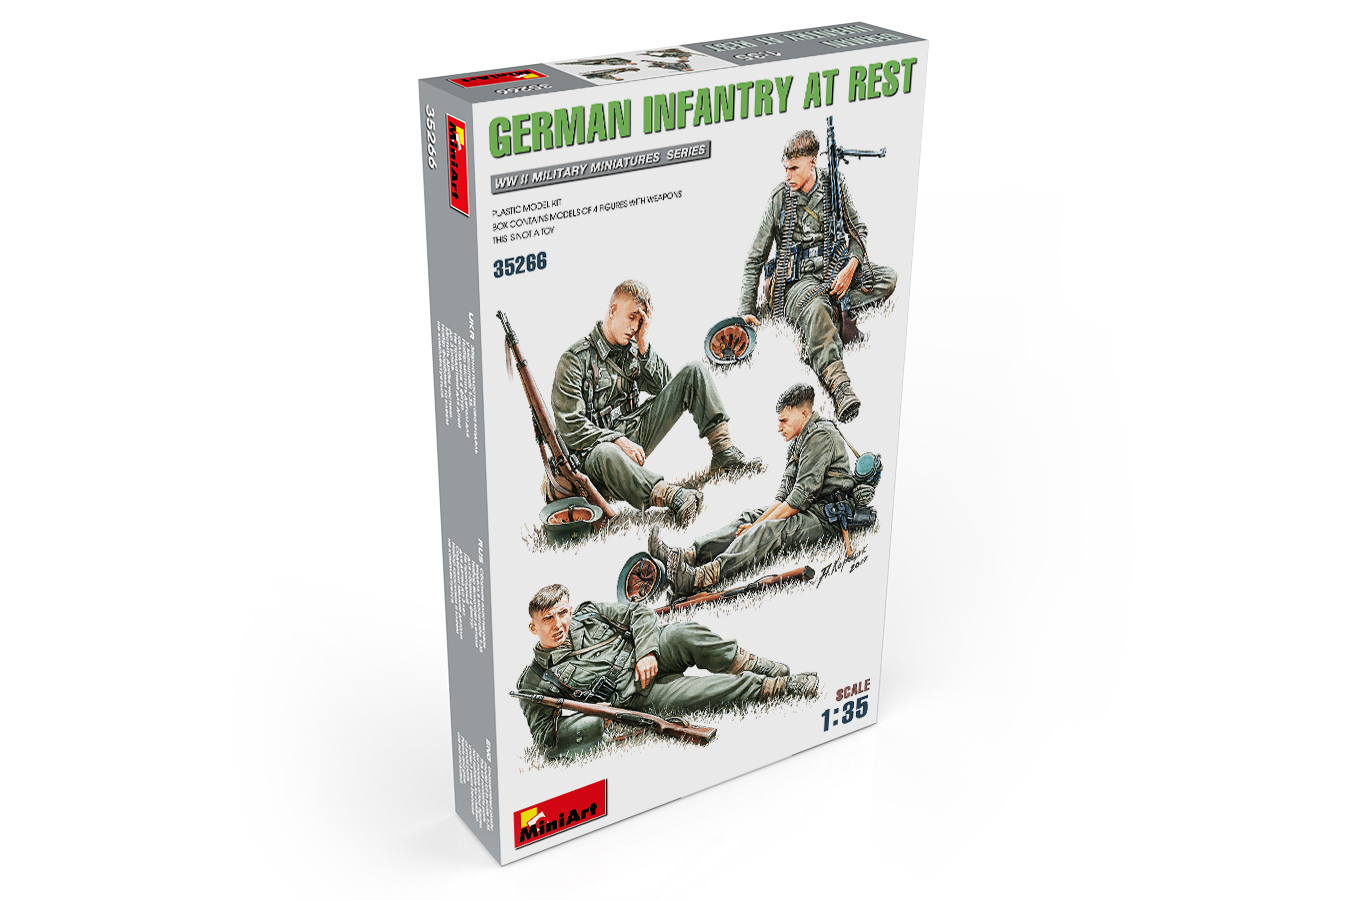 35266 GERMAN INFANTRY AT REST – Miniart